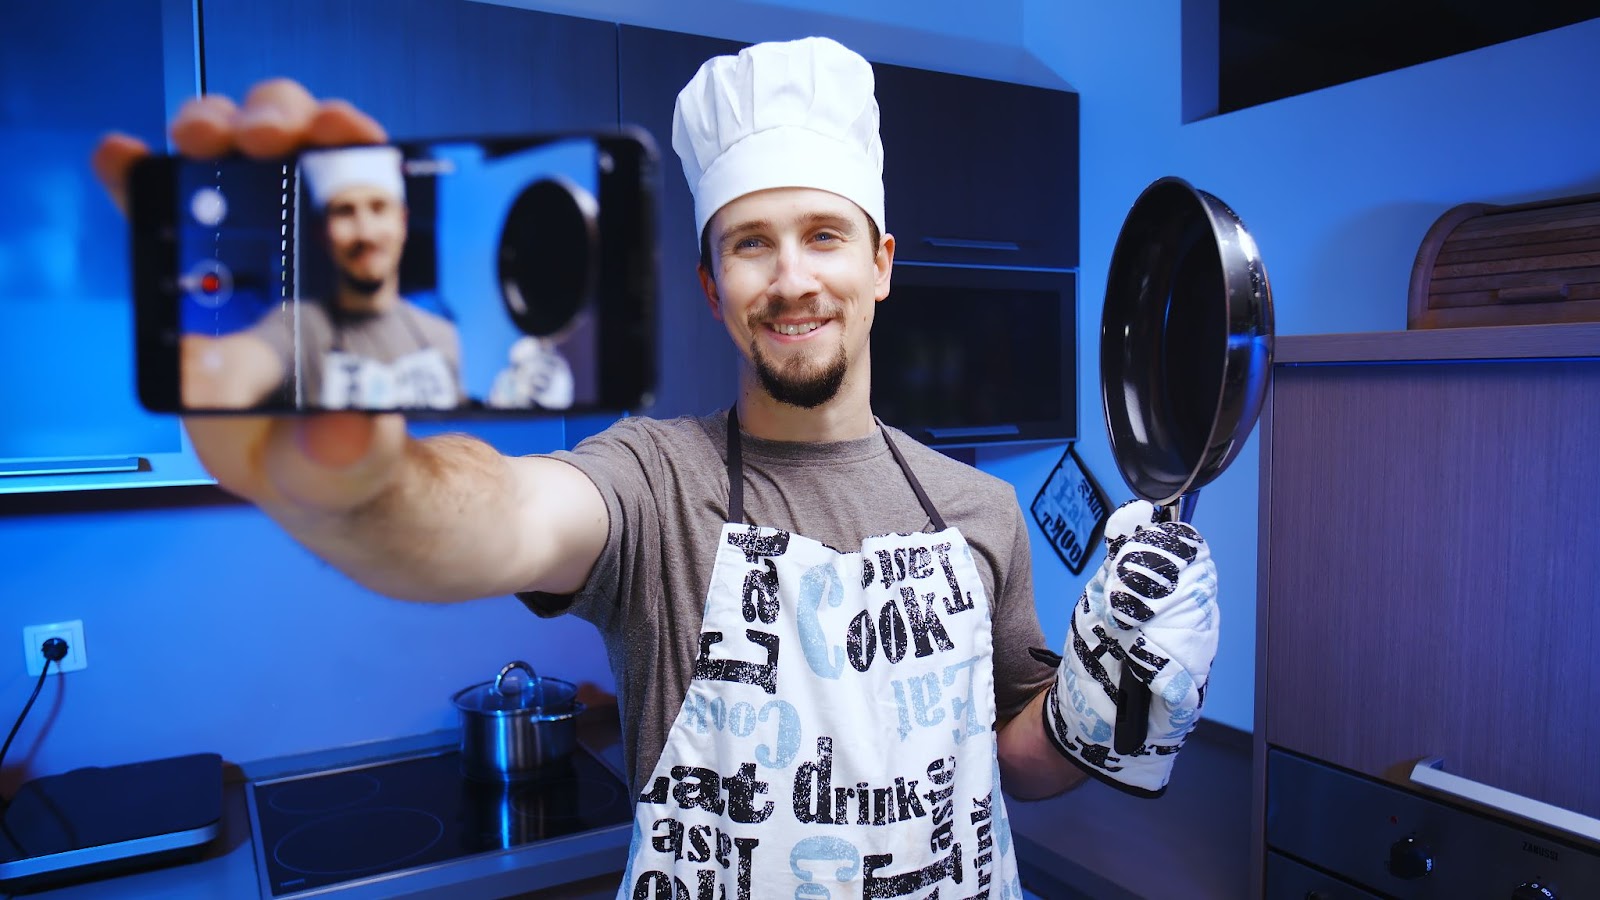 How to find influencers: person wearing a chef's hat recording himself using his phone